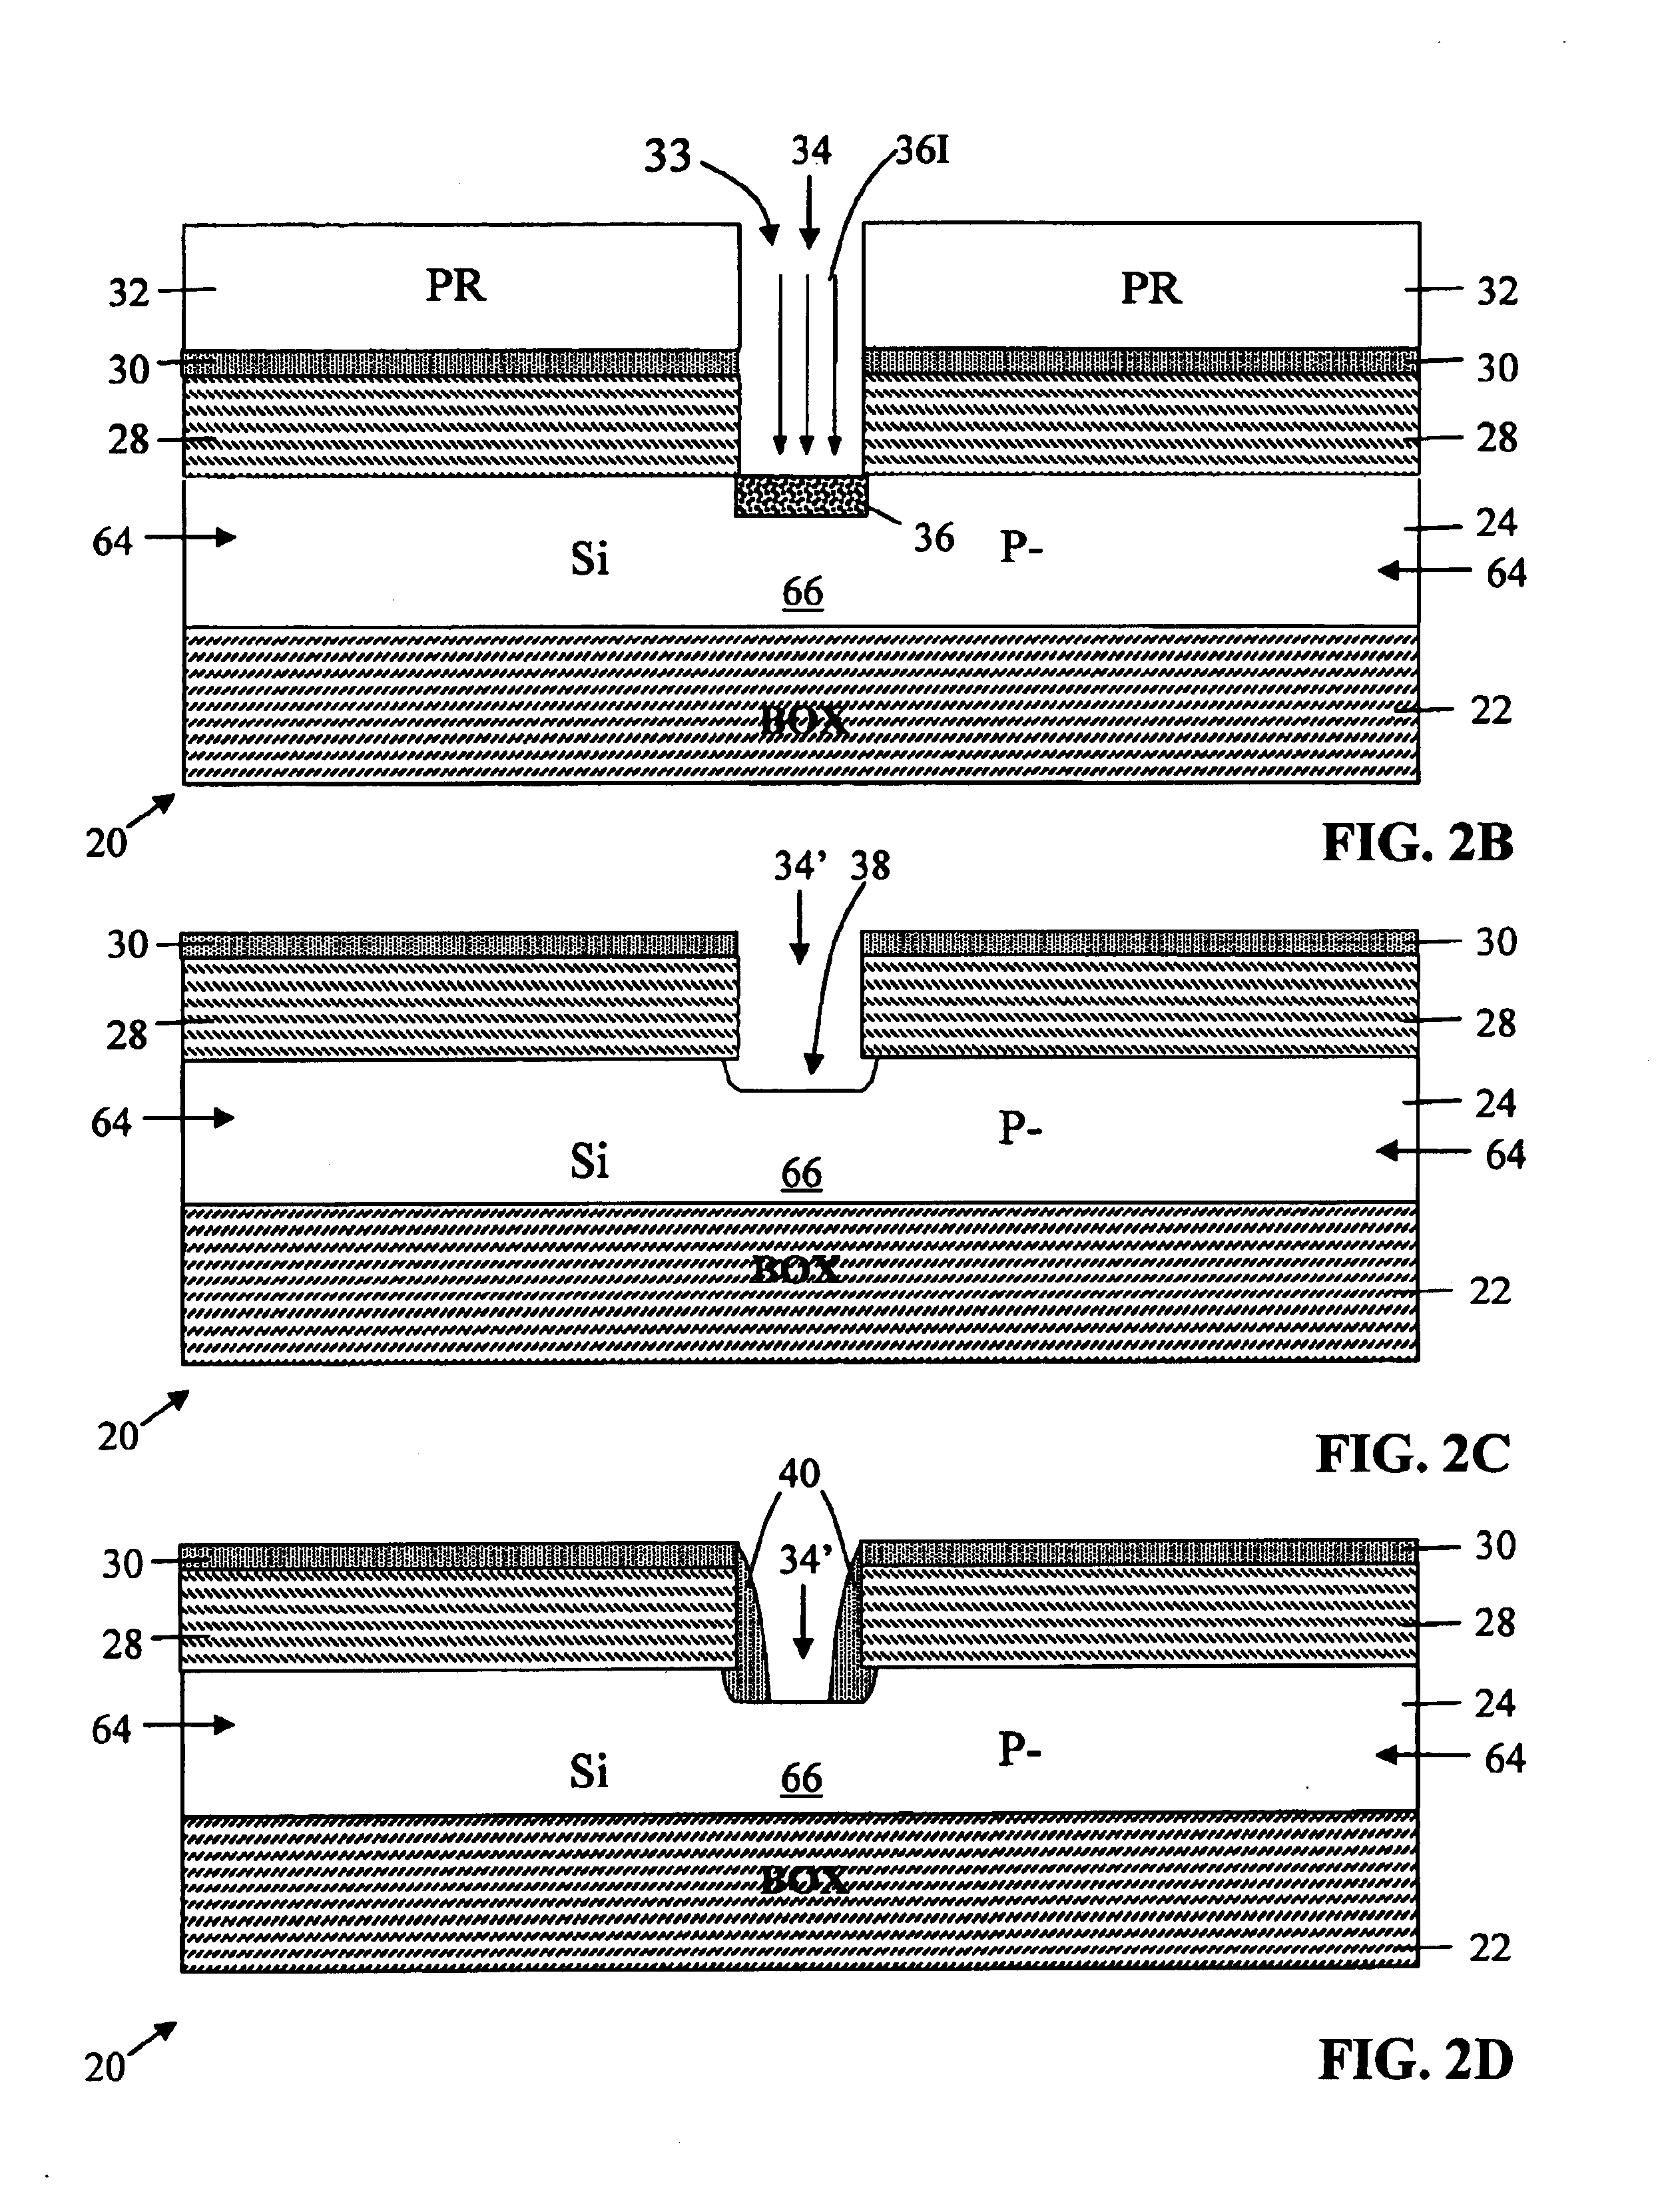 Method of forming an electronic device on a recess in the surface of a thin film of silicon etched to a precise thickness